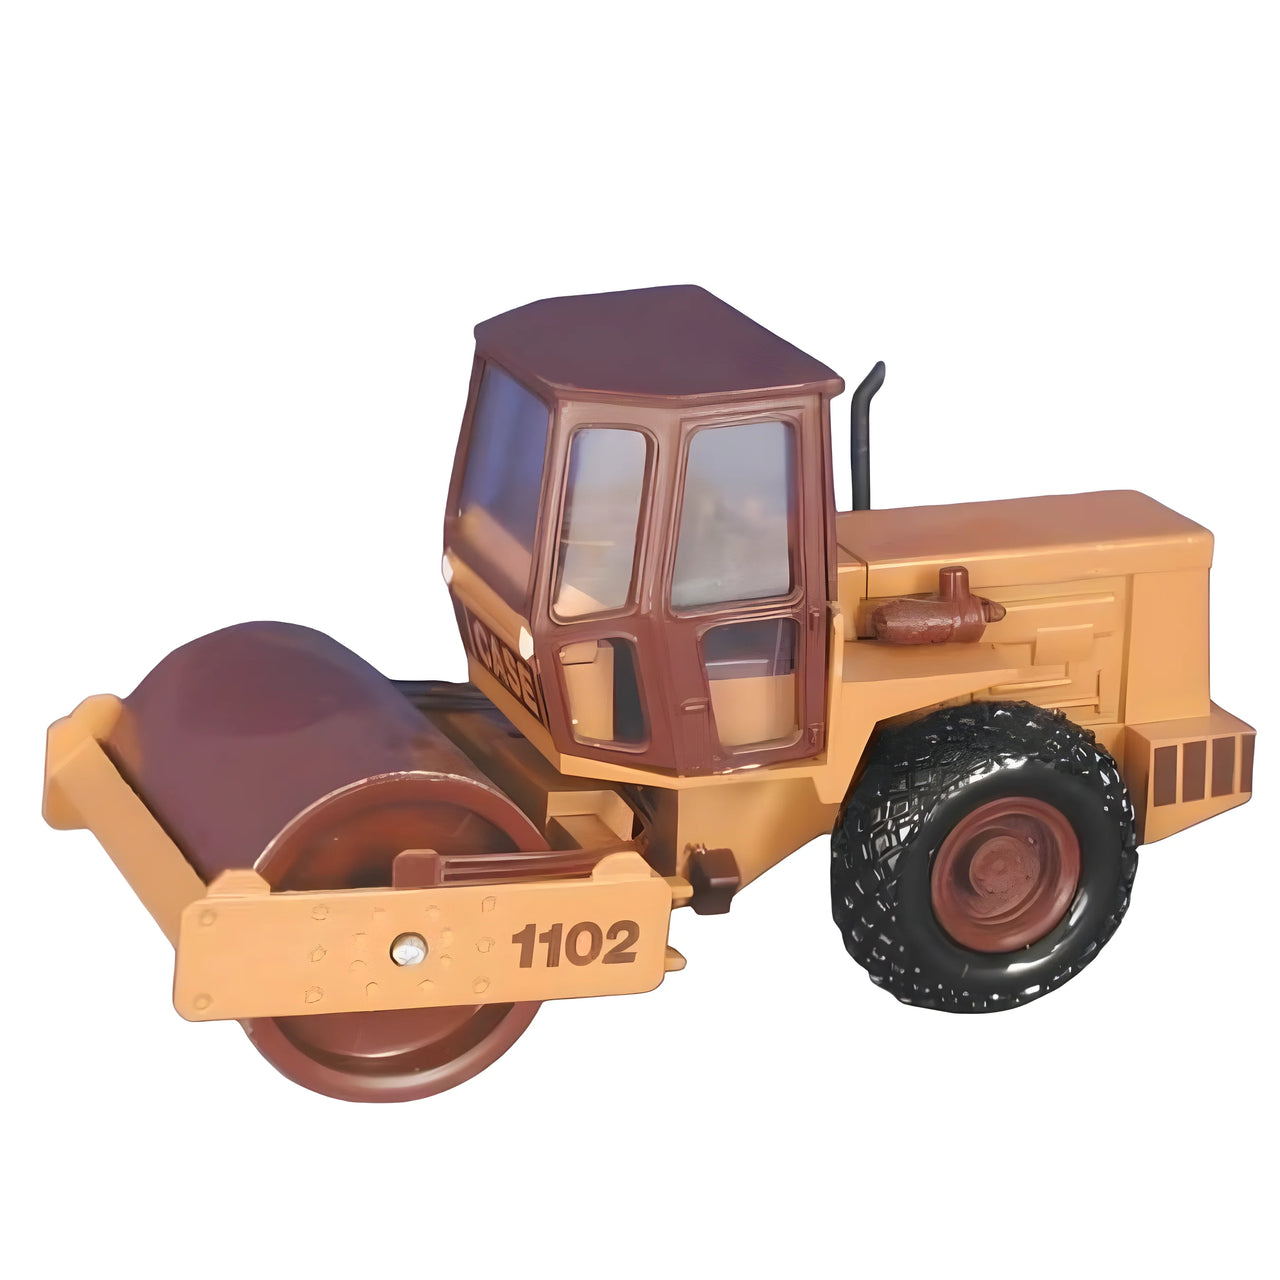 2703 Case-Vibromax 1102 Compactor Roller 1:35 Scale (Discontinued Model)